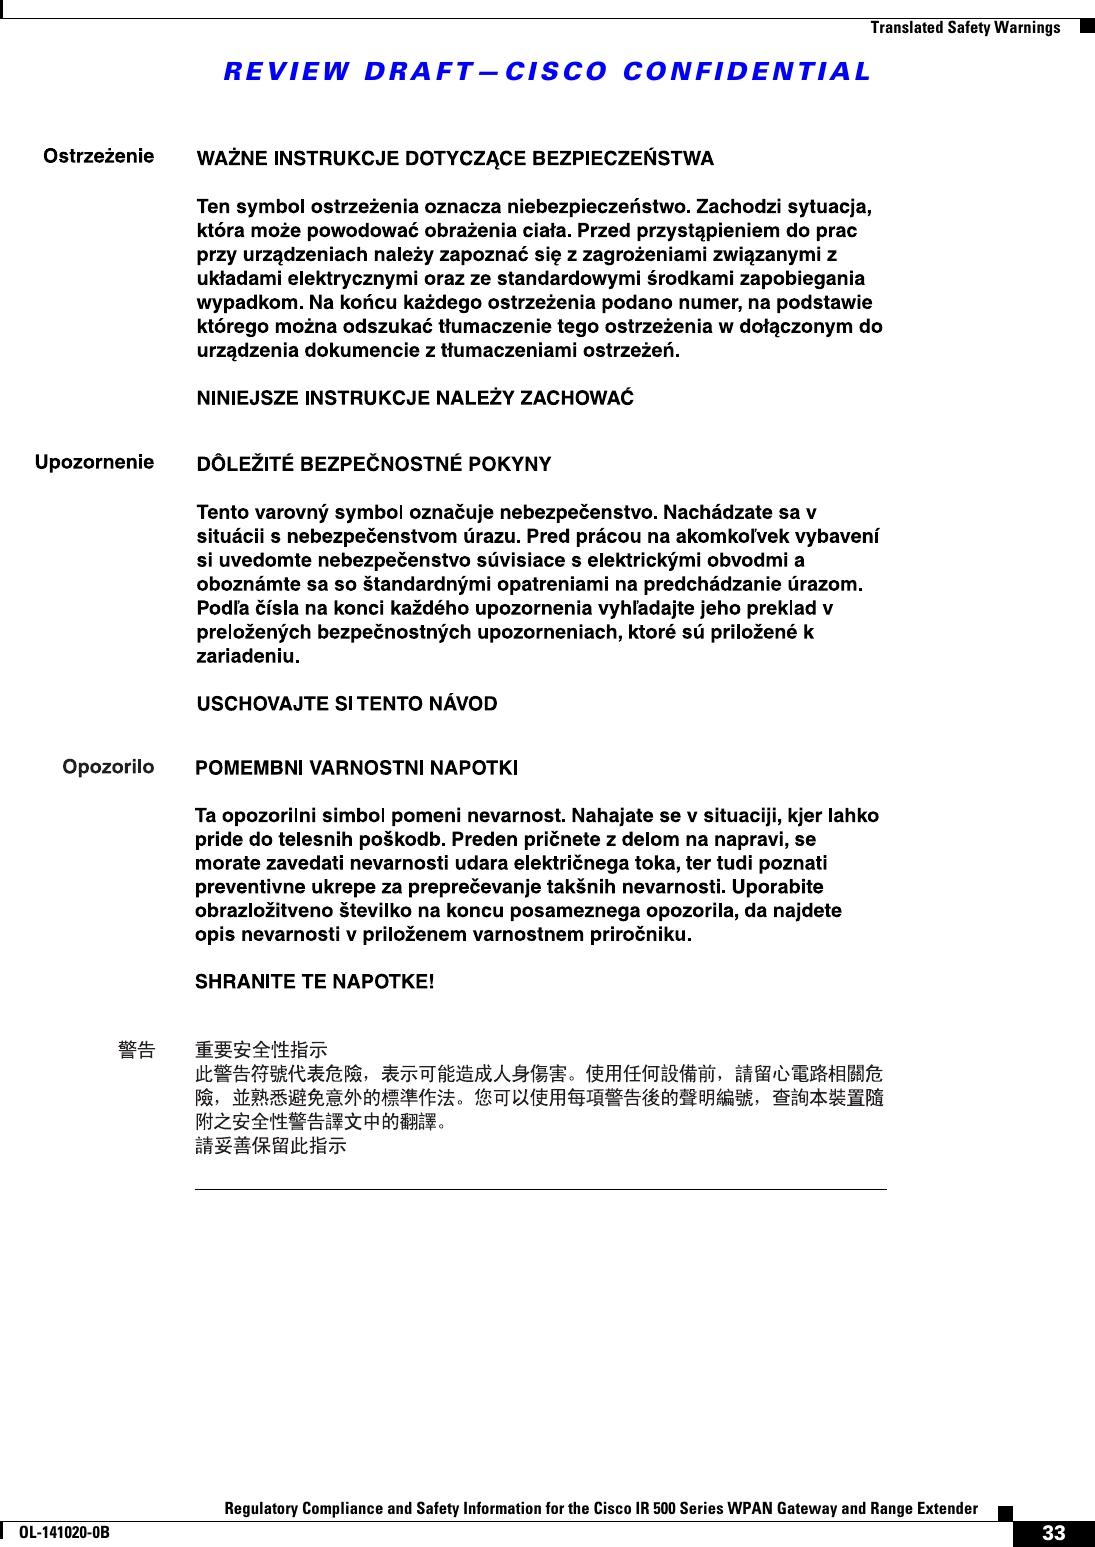 REVIEW DRAFT—CISCO CONFIDENTIAL33Regulatory Compliance and Safety Information for the Cisco IR 500 Series WPAN Gateway and Range ExtenderOL-141020-0B  Translated Safety Warnings